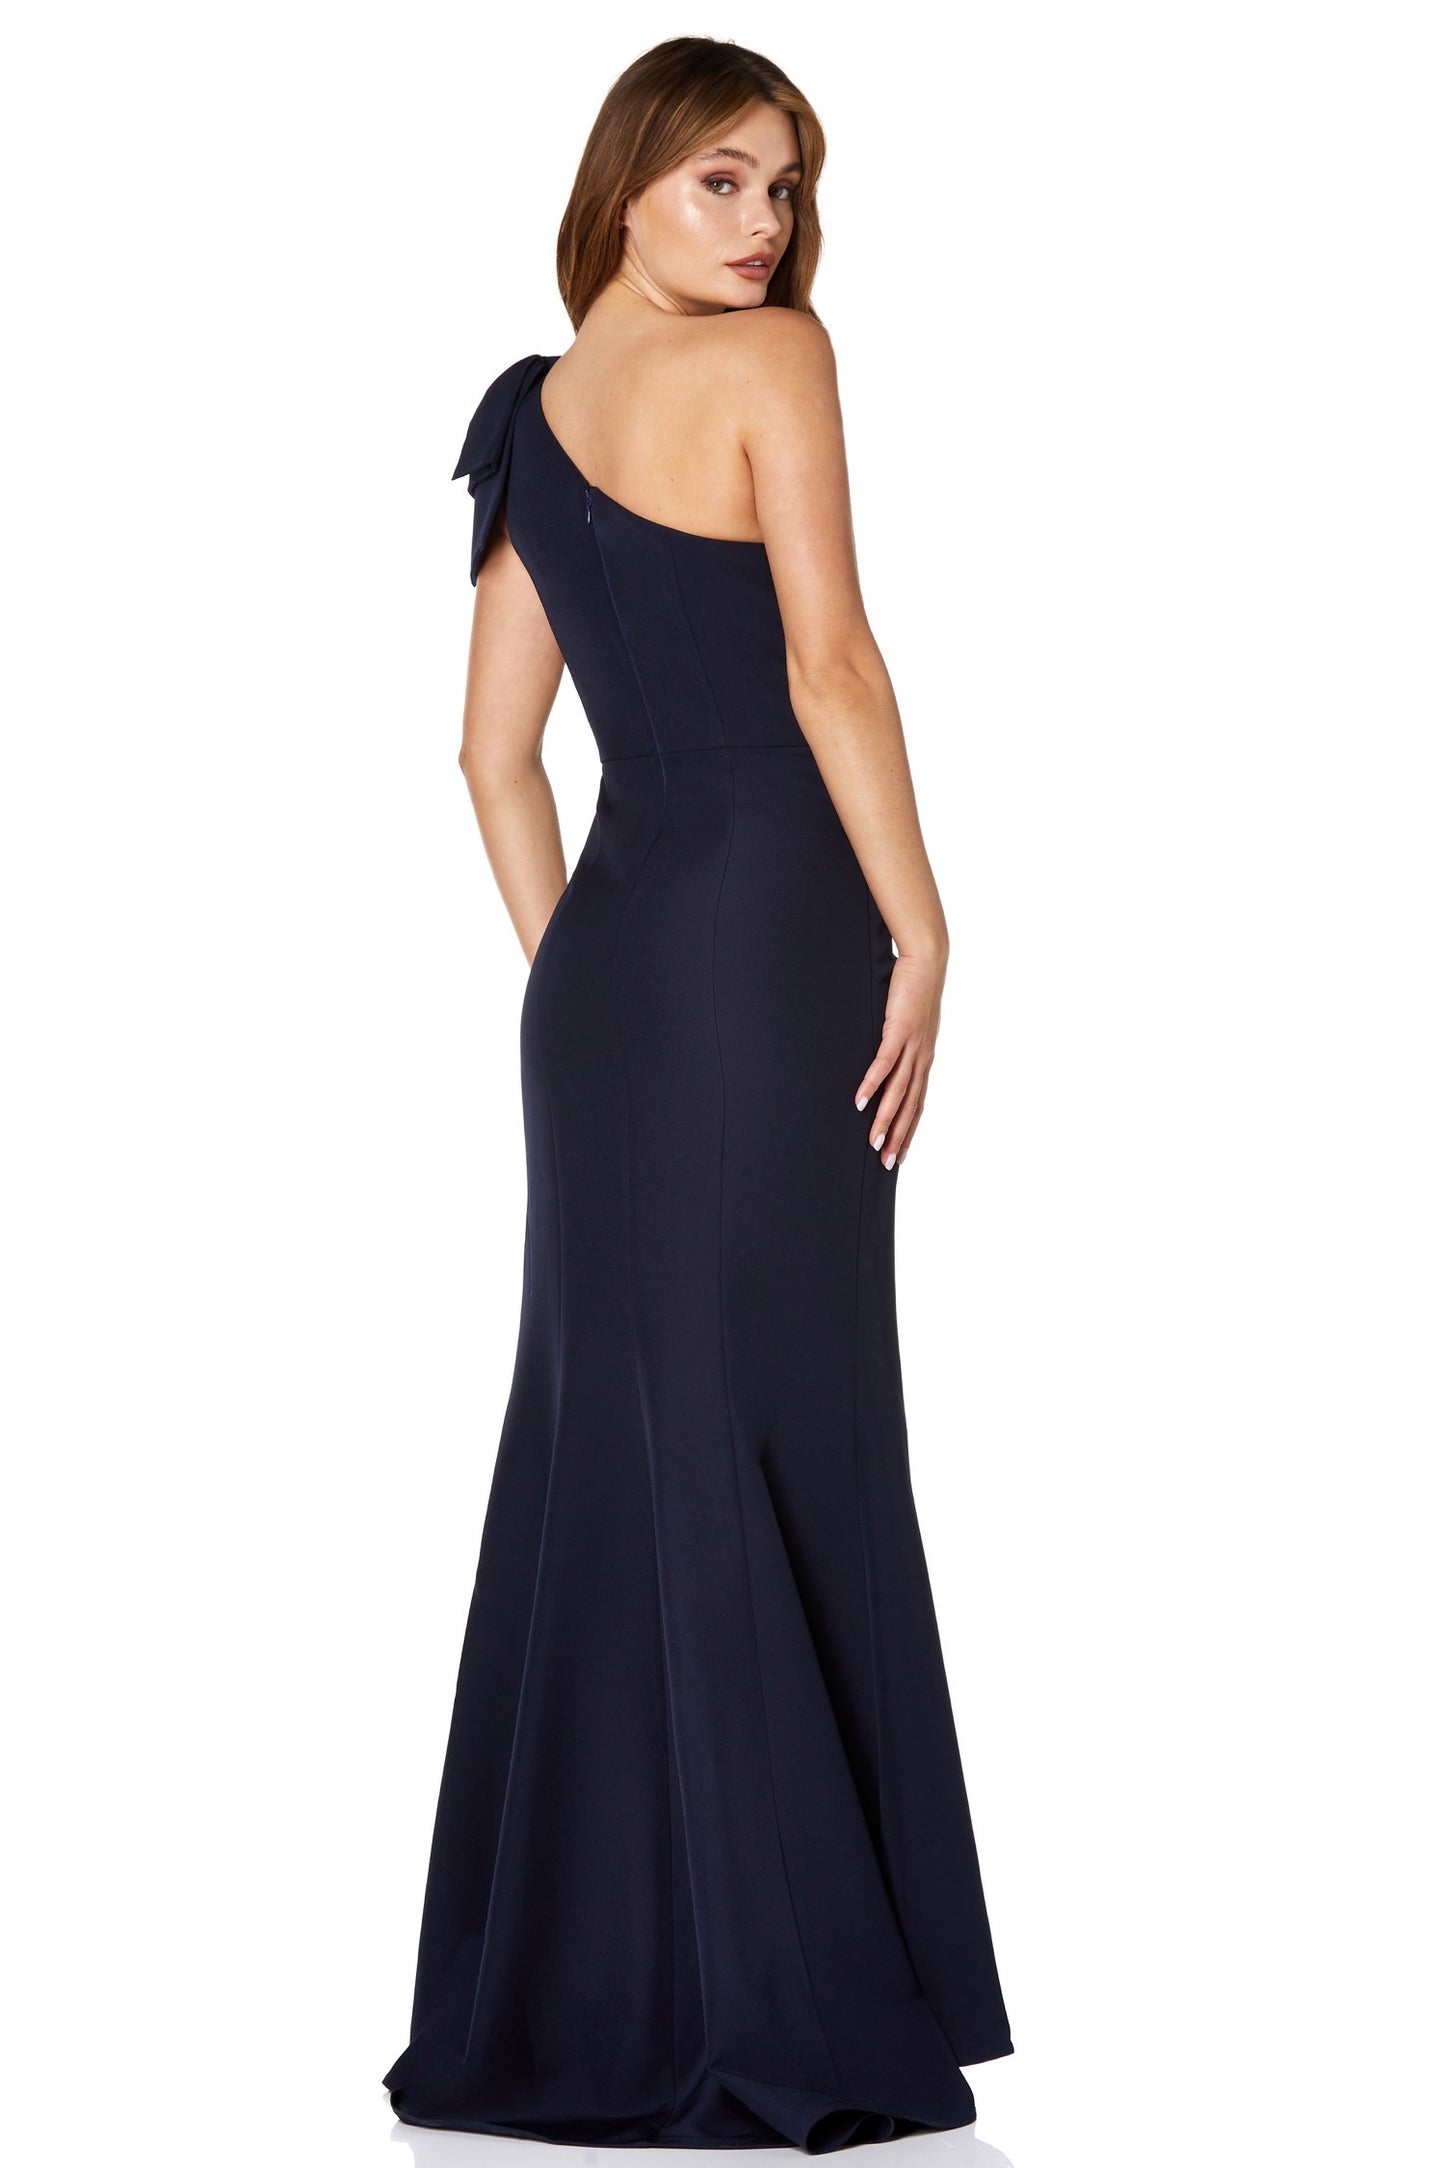 Kayla One Shoulder Bow Detail Maxi Dress with Thigh Split